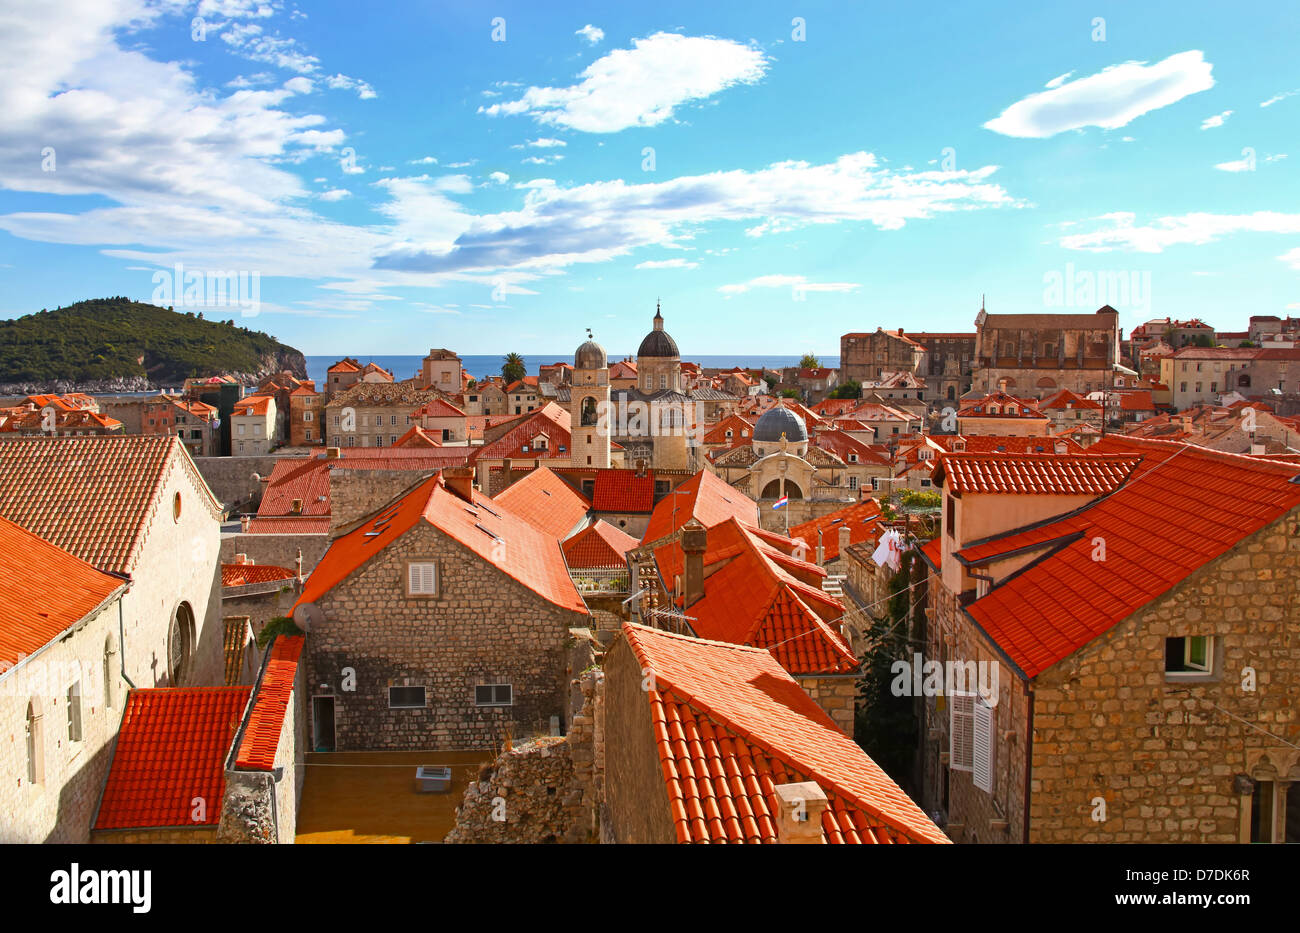 View of many landmarks of Old town in city of Dubrovnik, Croatia. Classic red tiled rooftops with Adriatic sea Stock Photo